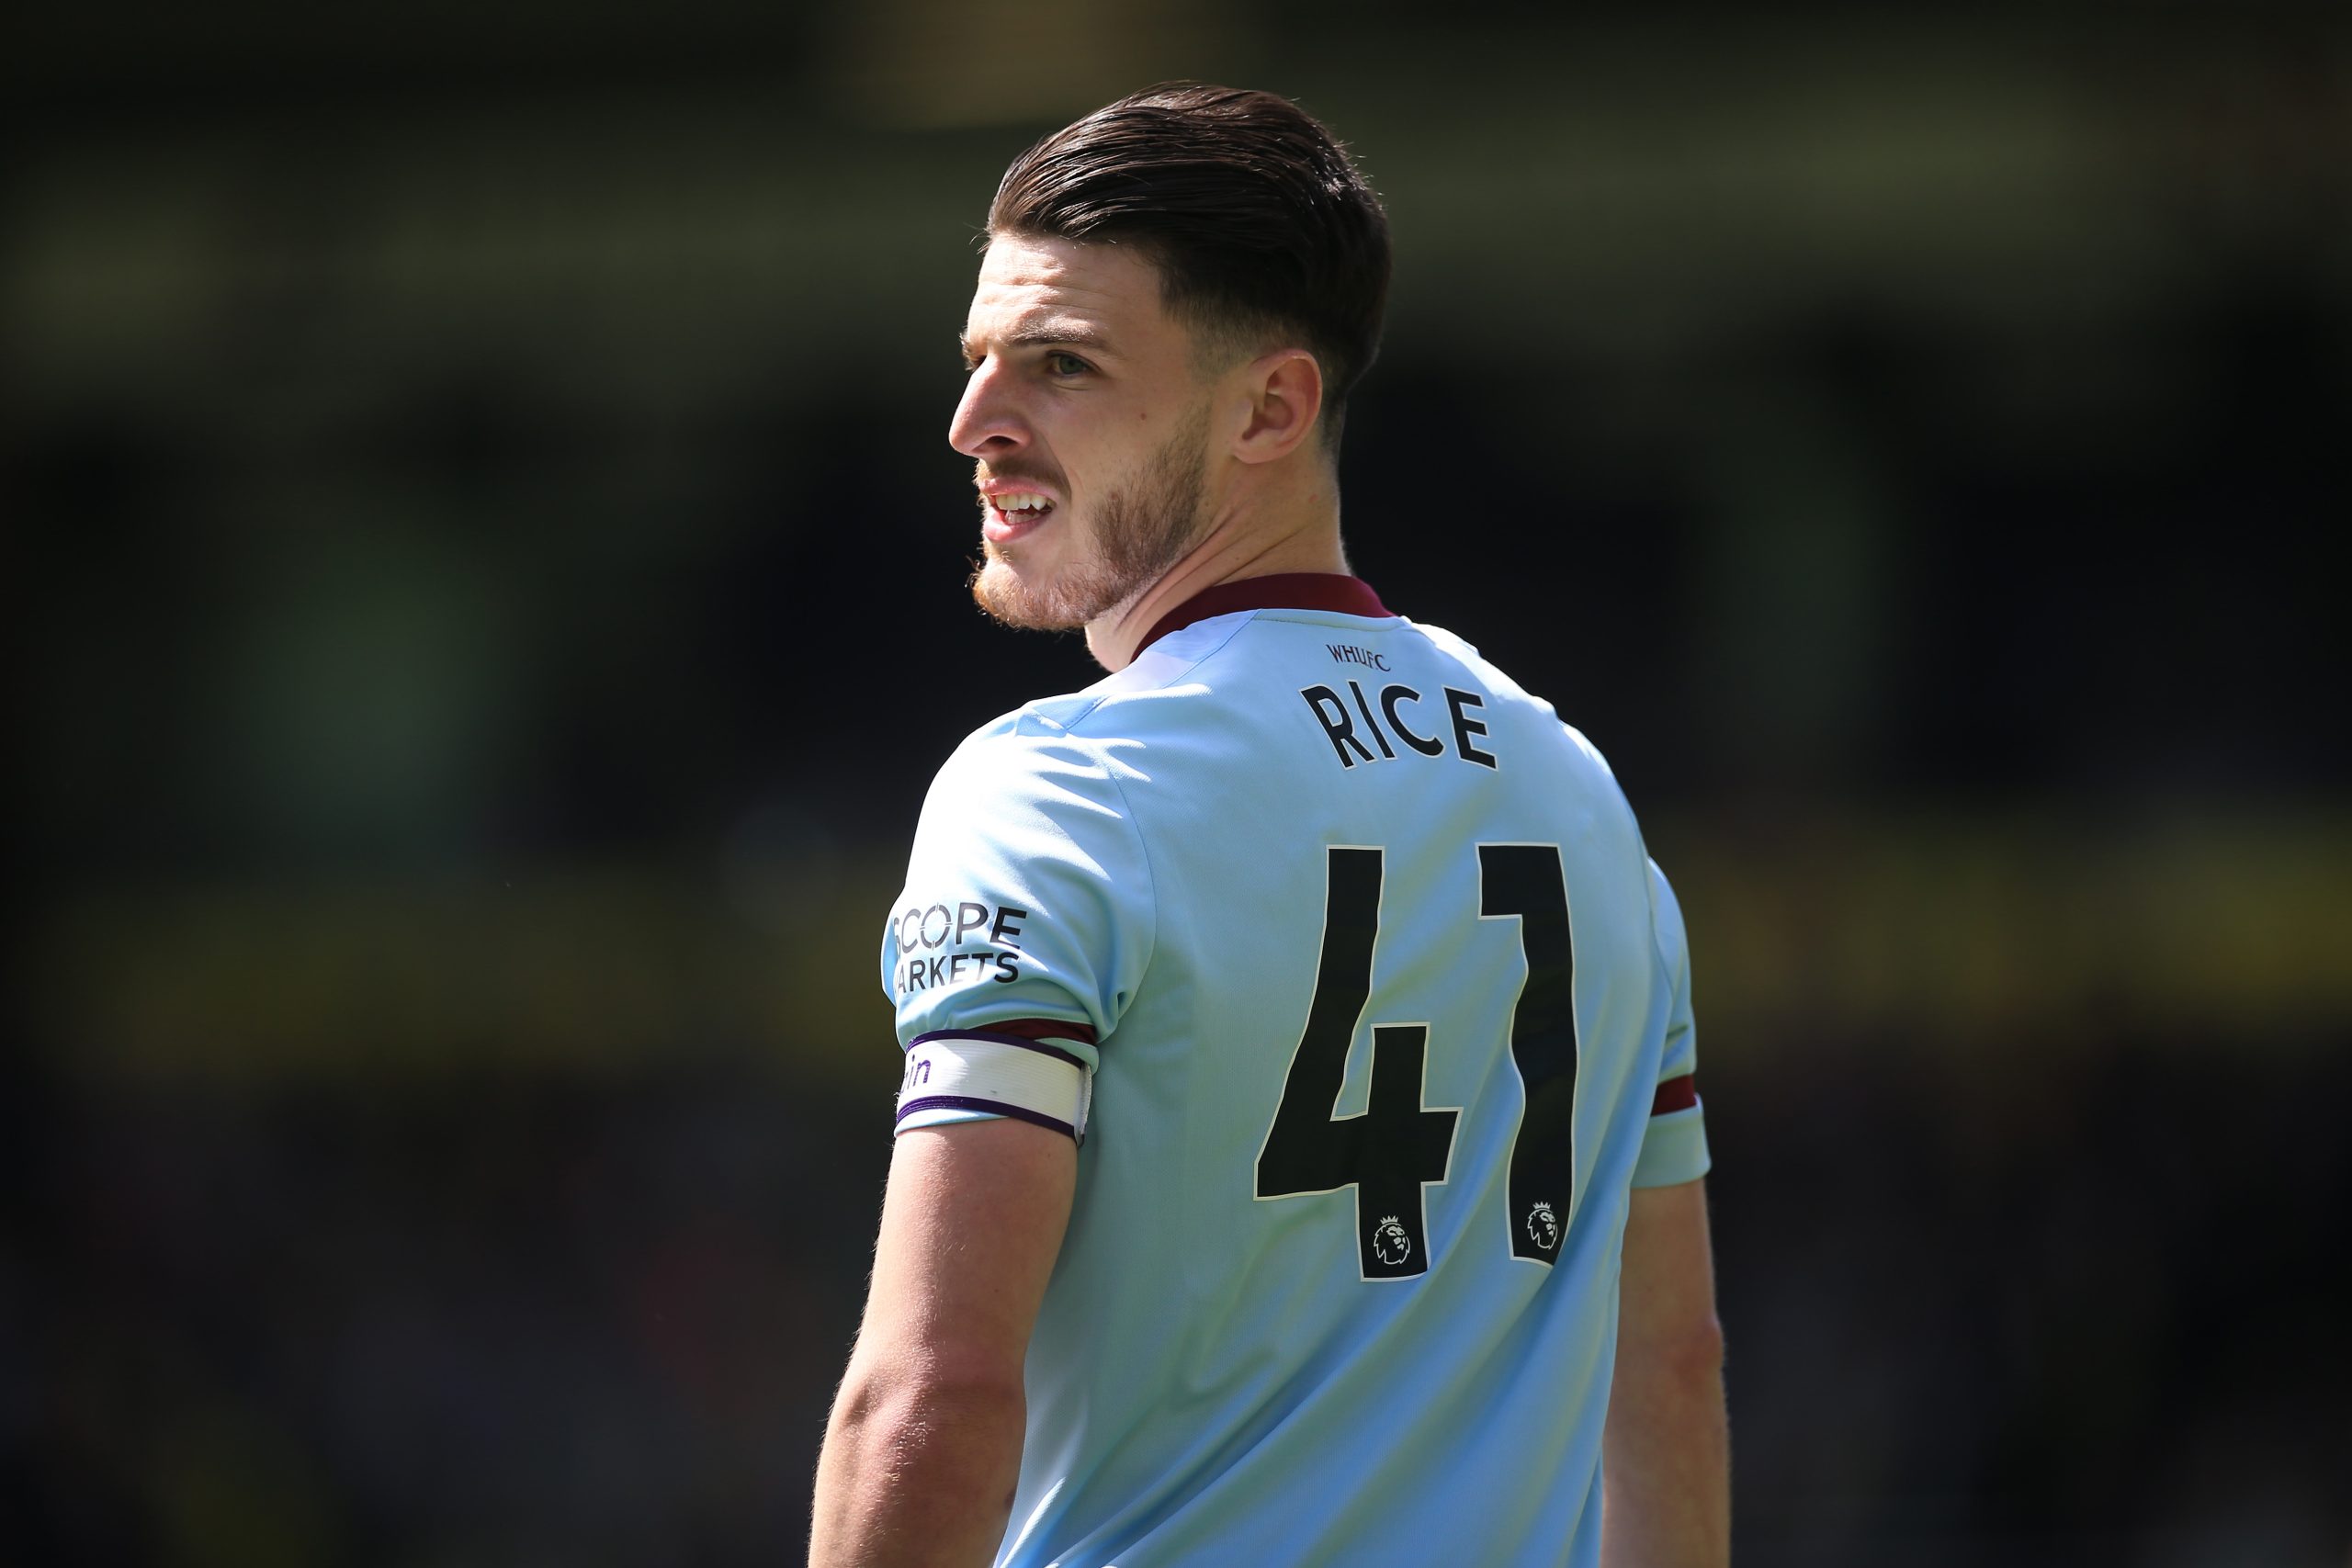 Declan Rice claims Mikel Arteta was the reason he decided to join Arsenal over Chelsea and Manchester City.